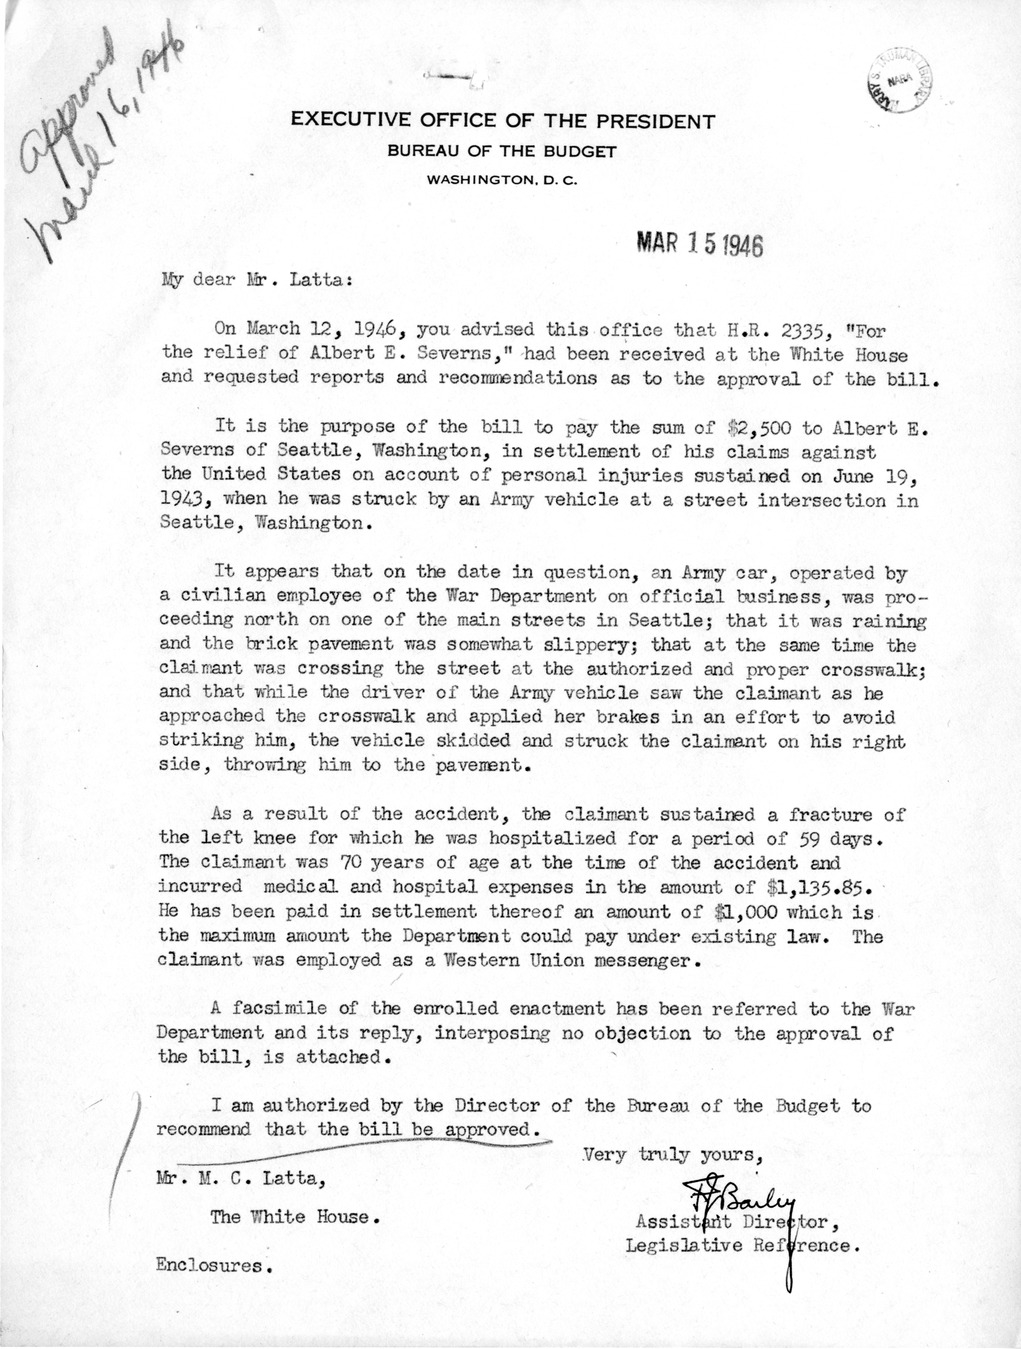 Memorandum from Frederick J. Bailey to M. C. Latta, H. R. 2335, For the Relief of Albert E. Severns, with Attachments